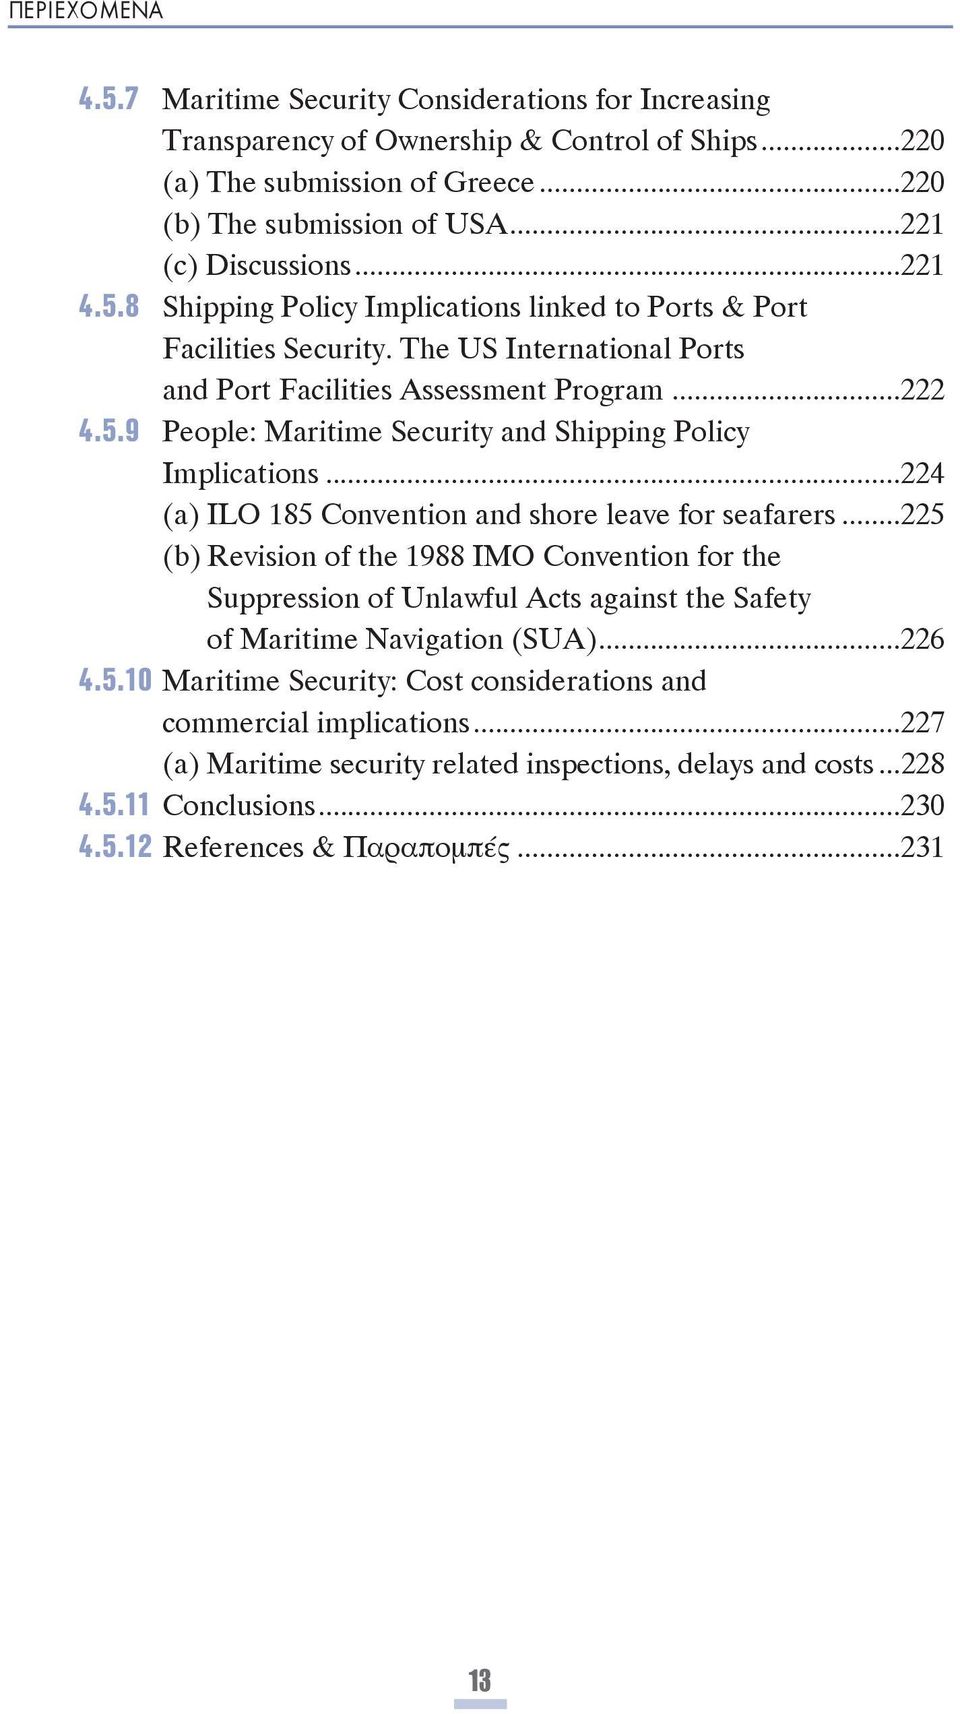 ..225 (b) Revision of the 1988 IMO Convention for the Suppression of Unlawful Acts against the Safety of Maritime Navigation (SUA)...226 4.5.10 Maritime Security: Cost considerations and commercial implications.